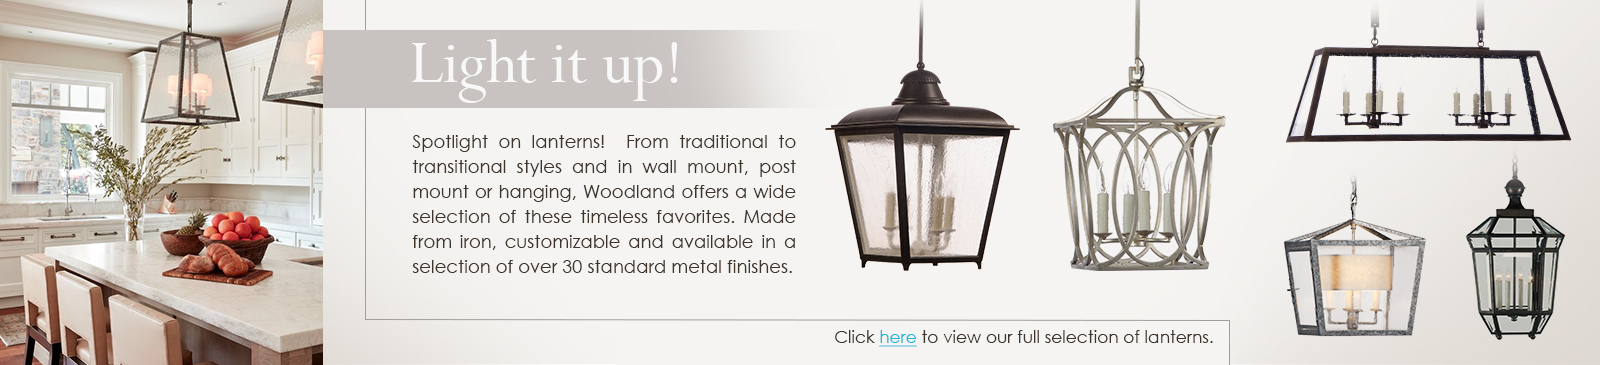 Contemporary transtitional tradional iron lanterns indoor outdoor by Woodland Furniture in Idaho Falls